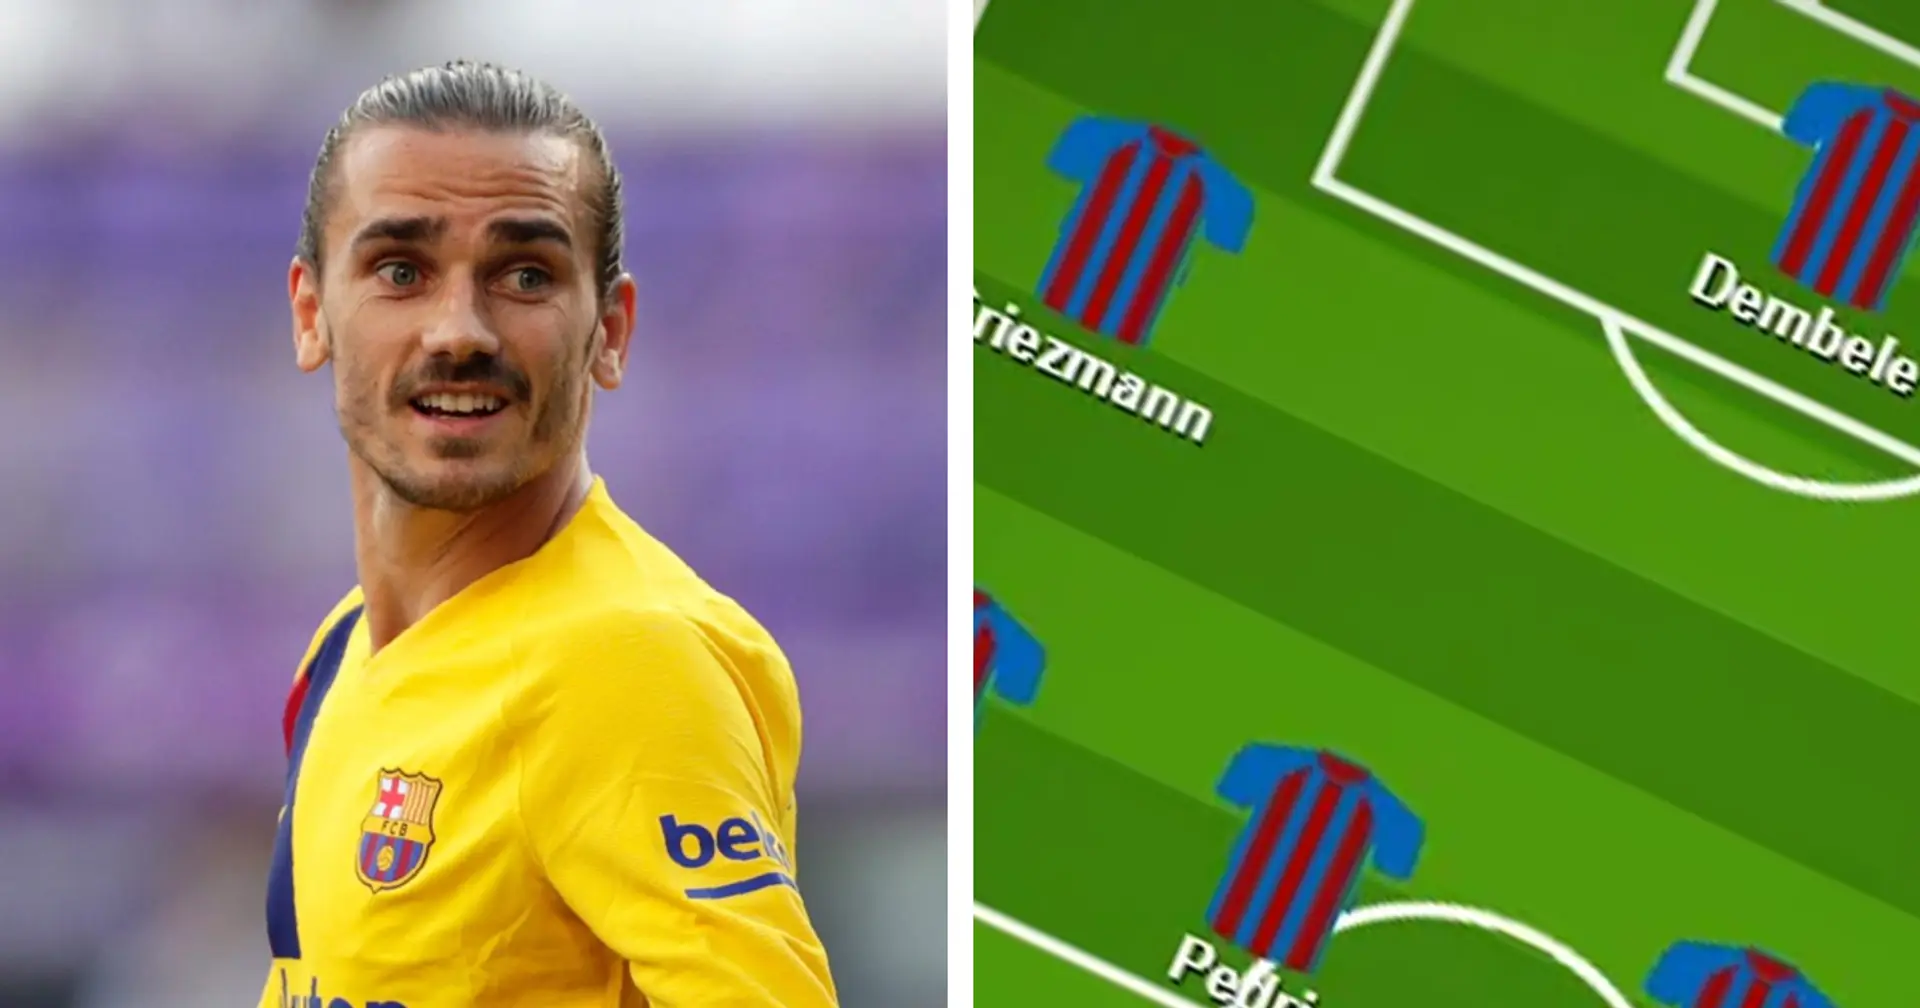 'Starting Griezmann, Dembele and Messi seems so perfect!': Barca fans select ultimate XI for Valladolid